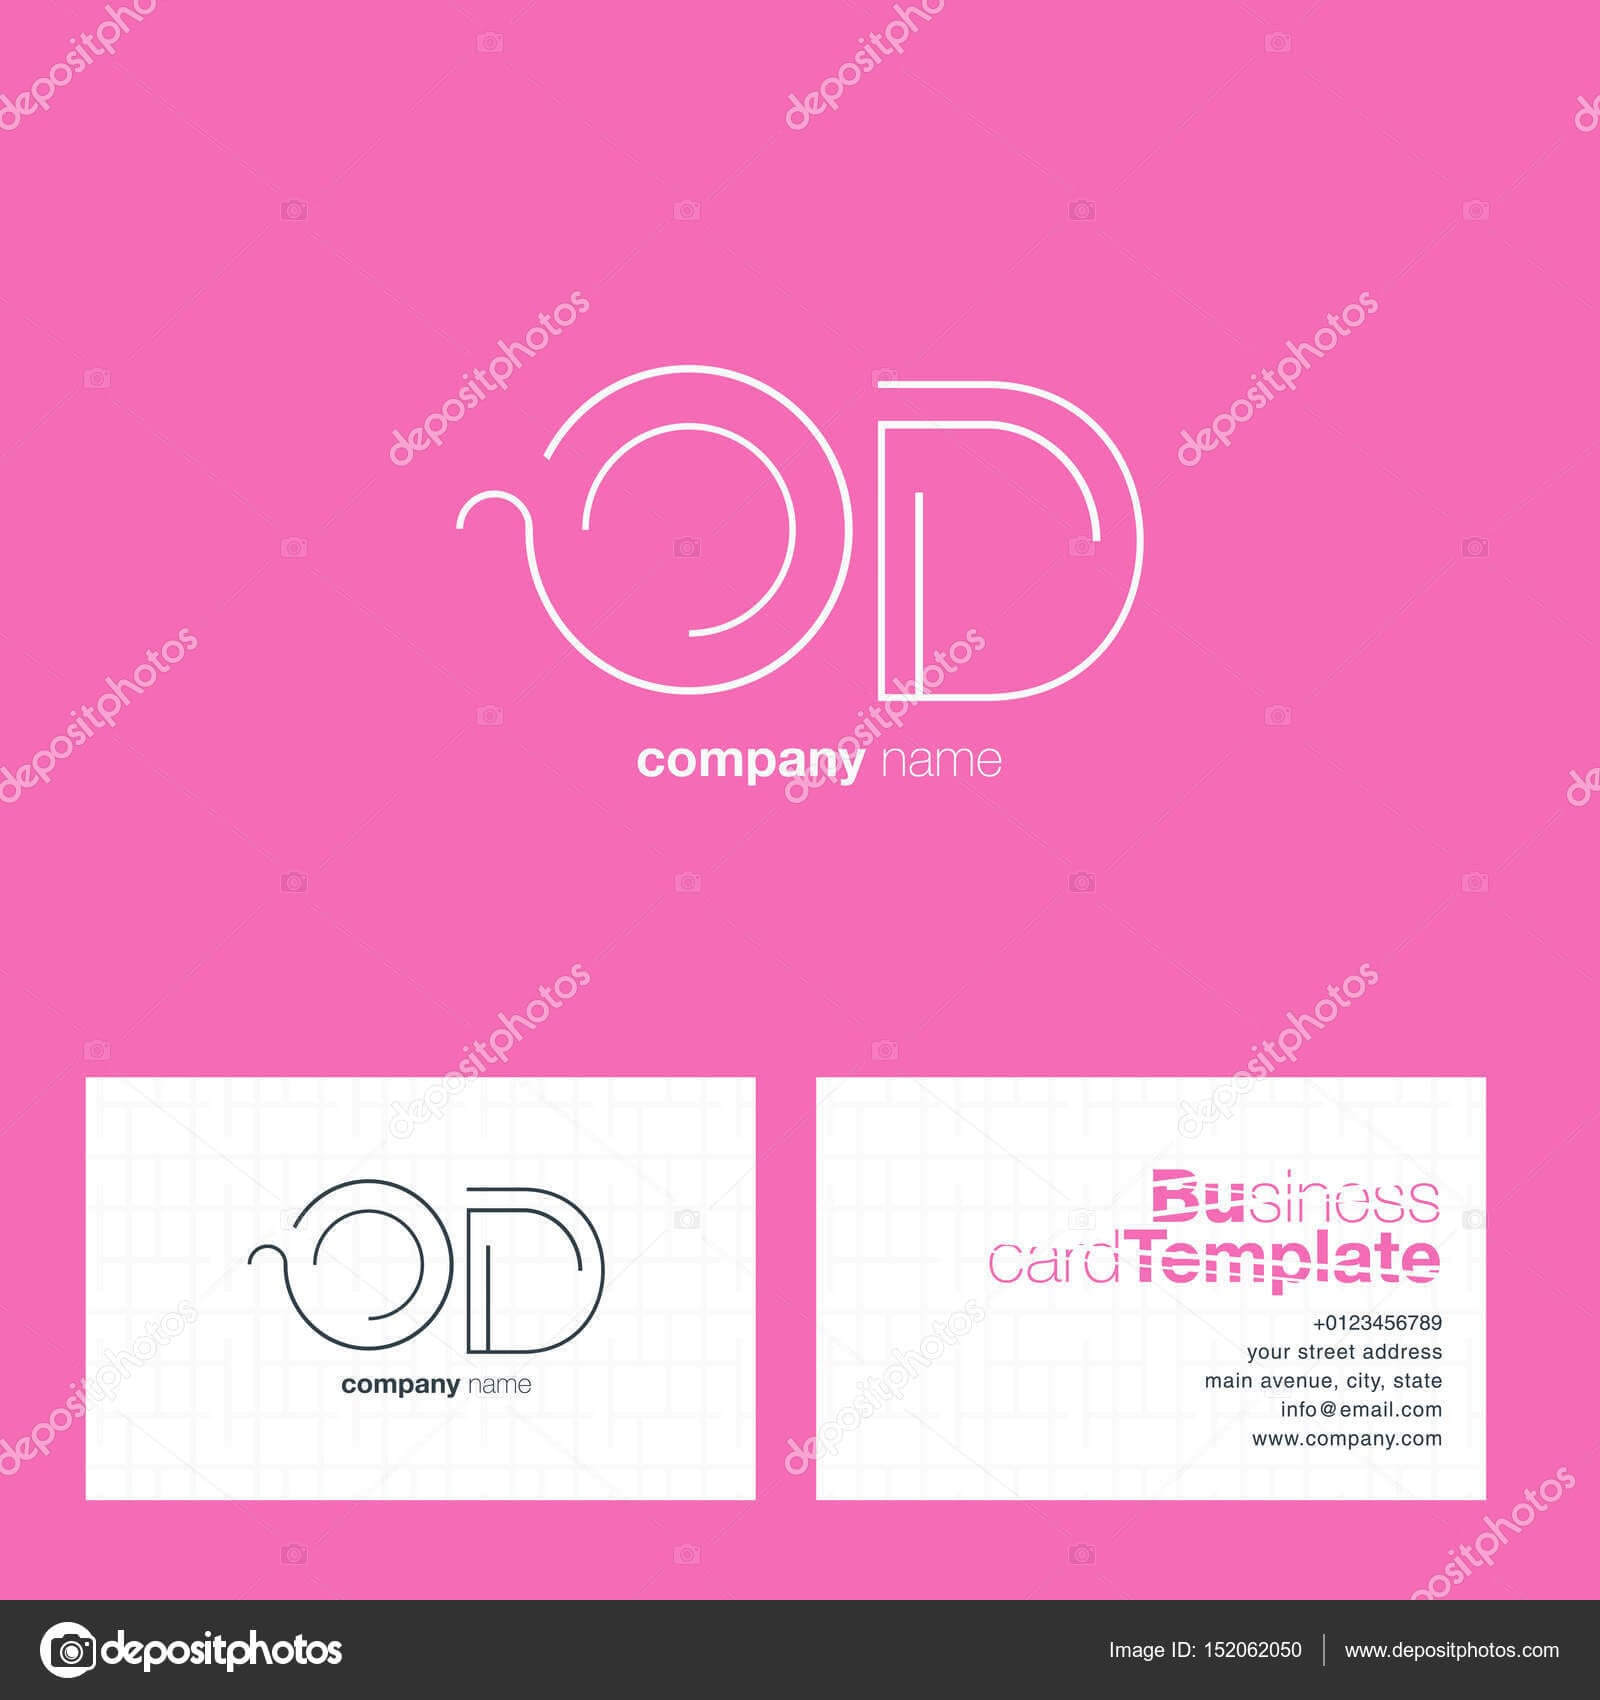 Mary Kay Business Card Template Free Download Professional Regarding Mary Kay Business Cards Templates Free